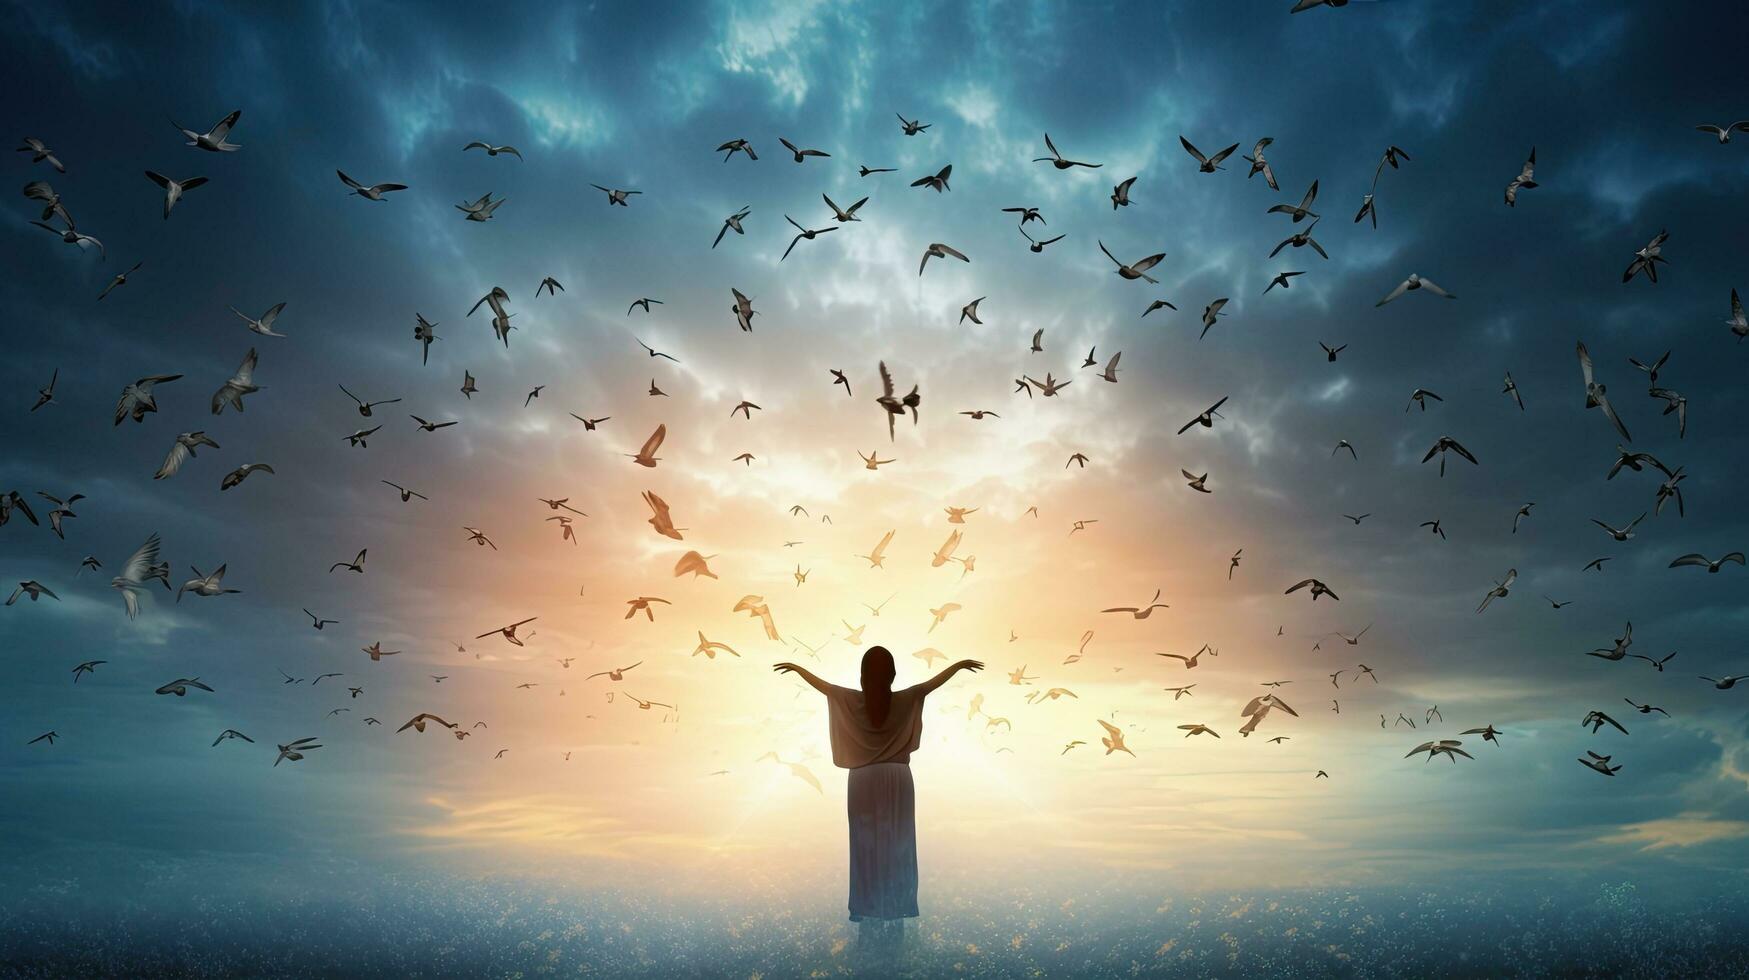 Woman standing alone with birds flying against heavenly backdrop on International Human Rights Day photo